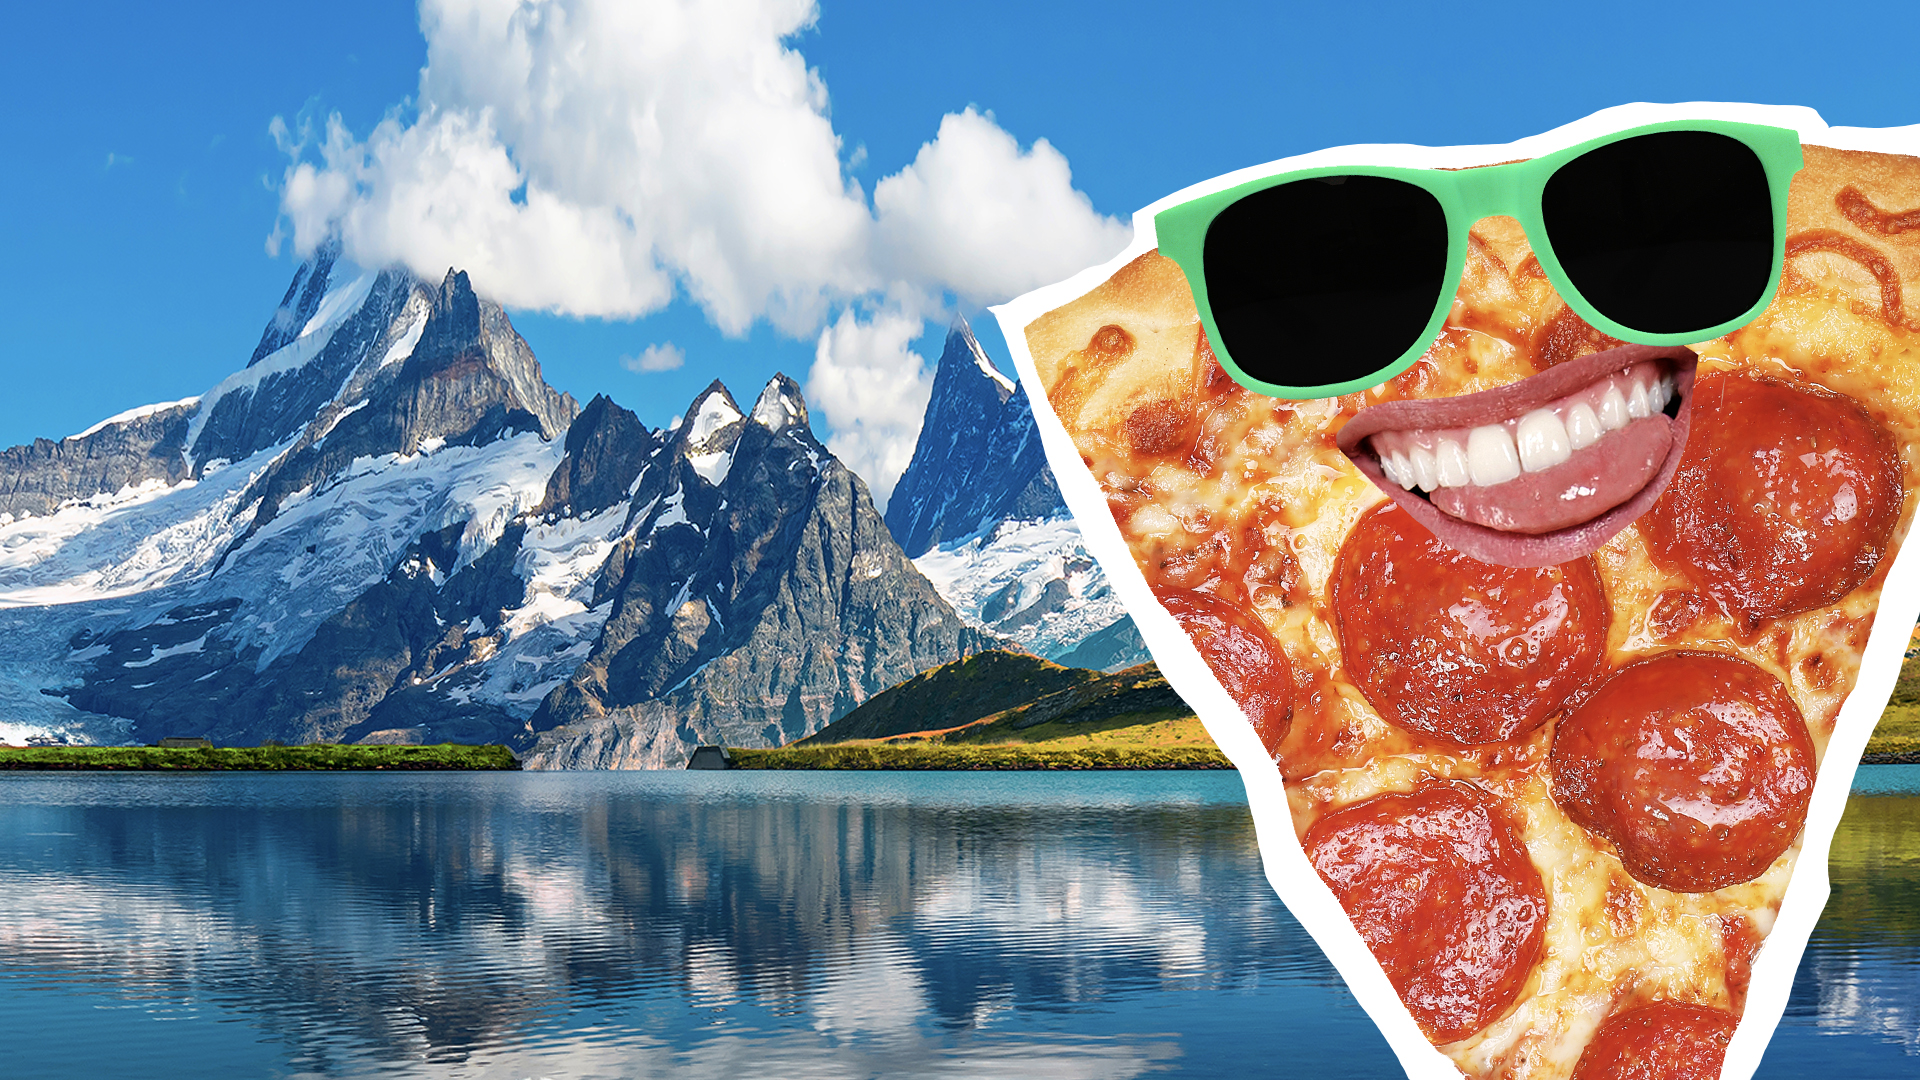 A slice of pizza in a beautiful mountain setting